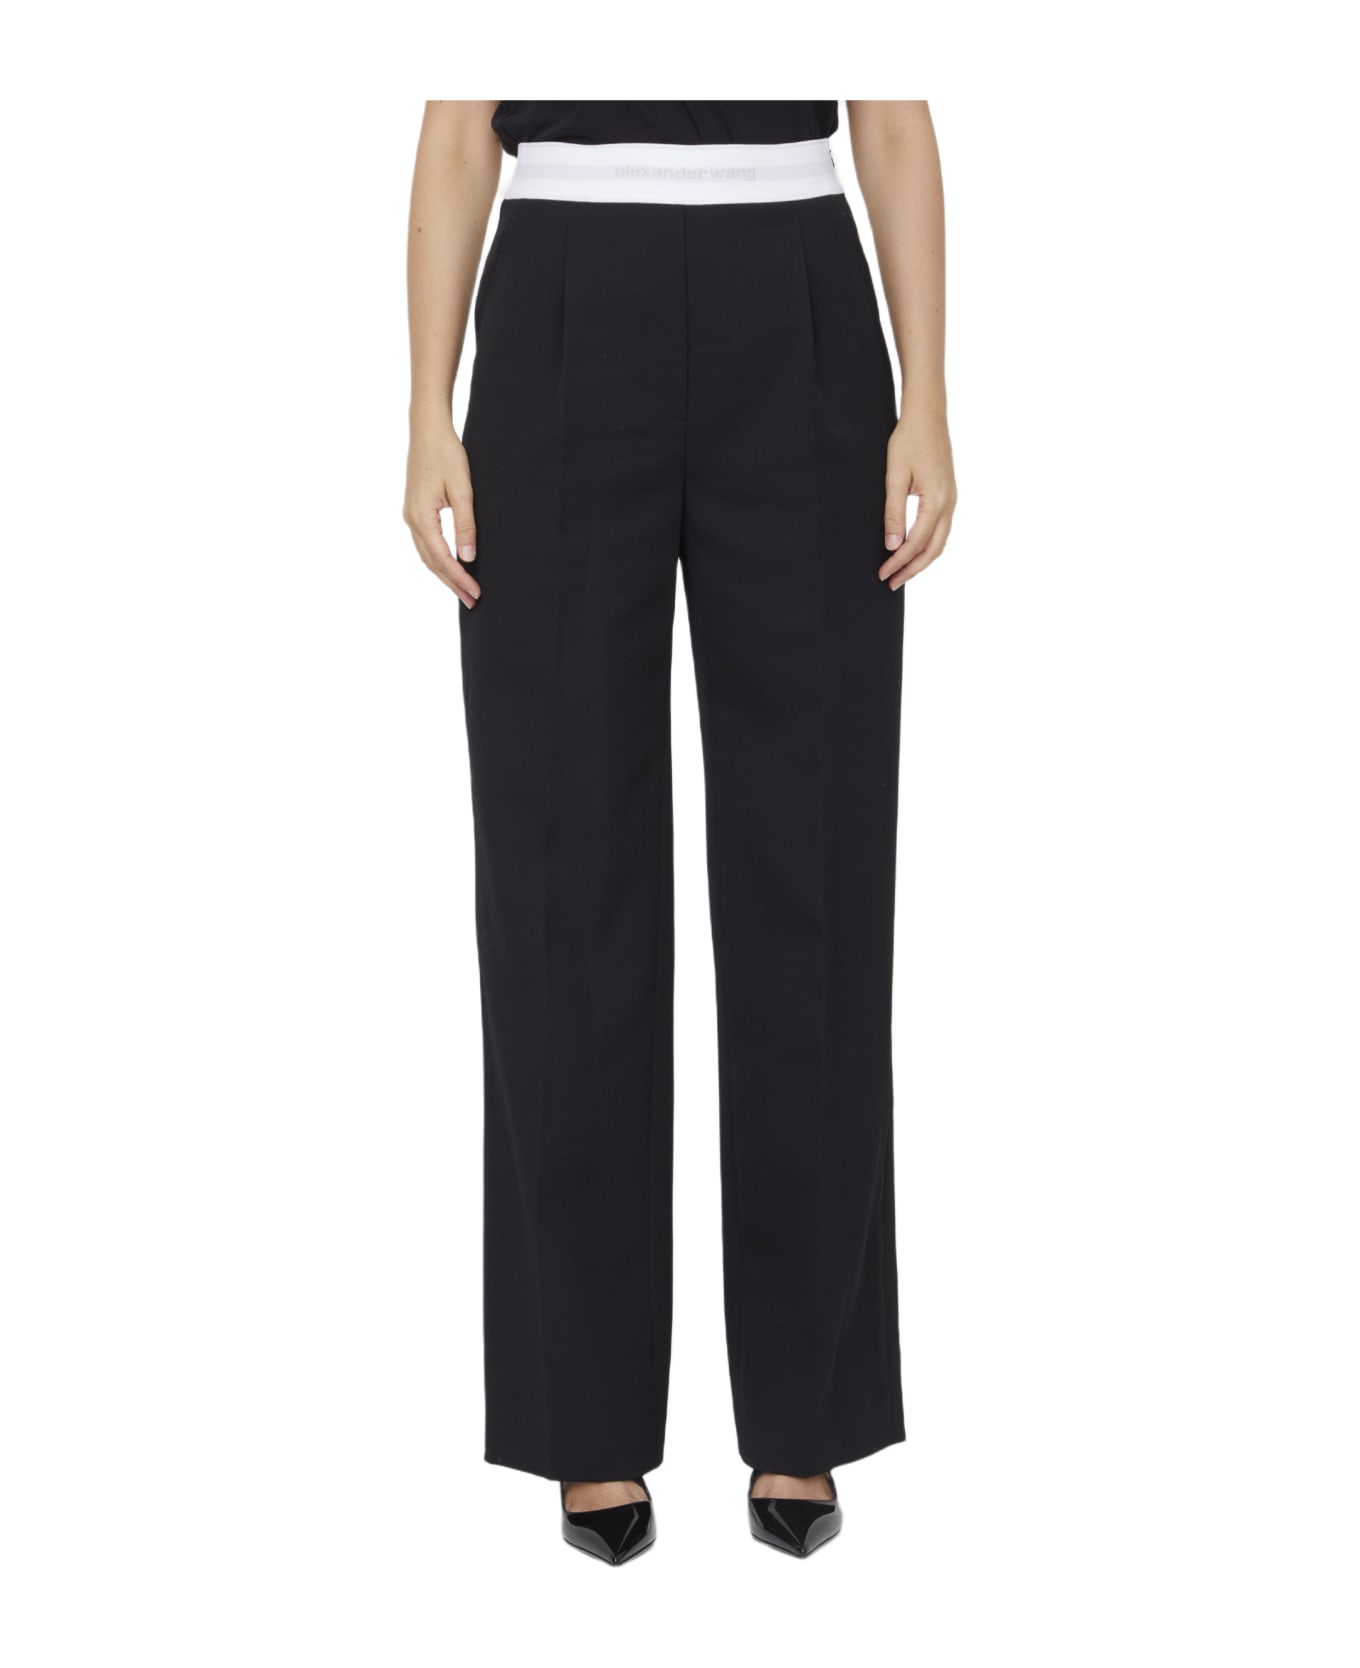 Alexander Wang Tailored Trousers - BLACK